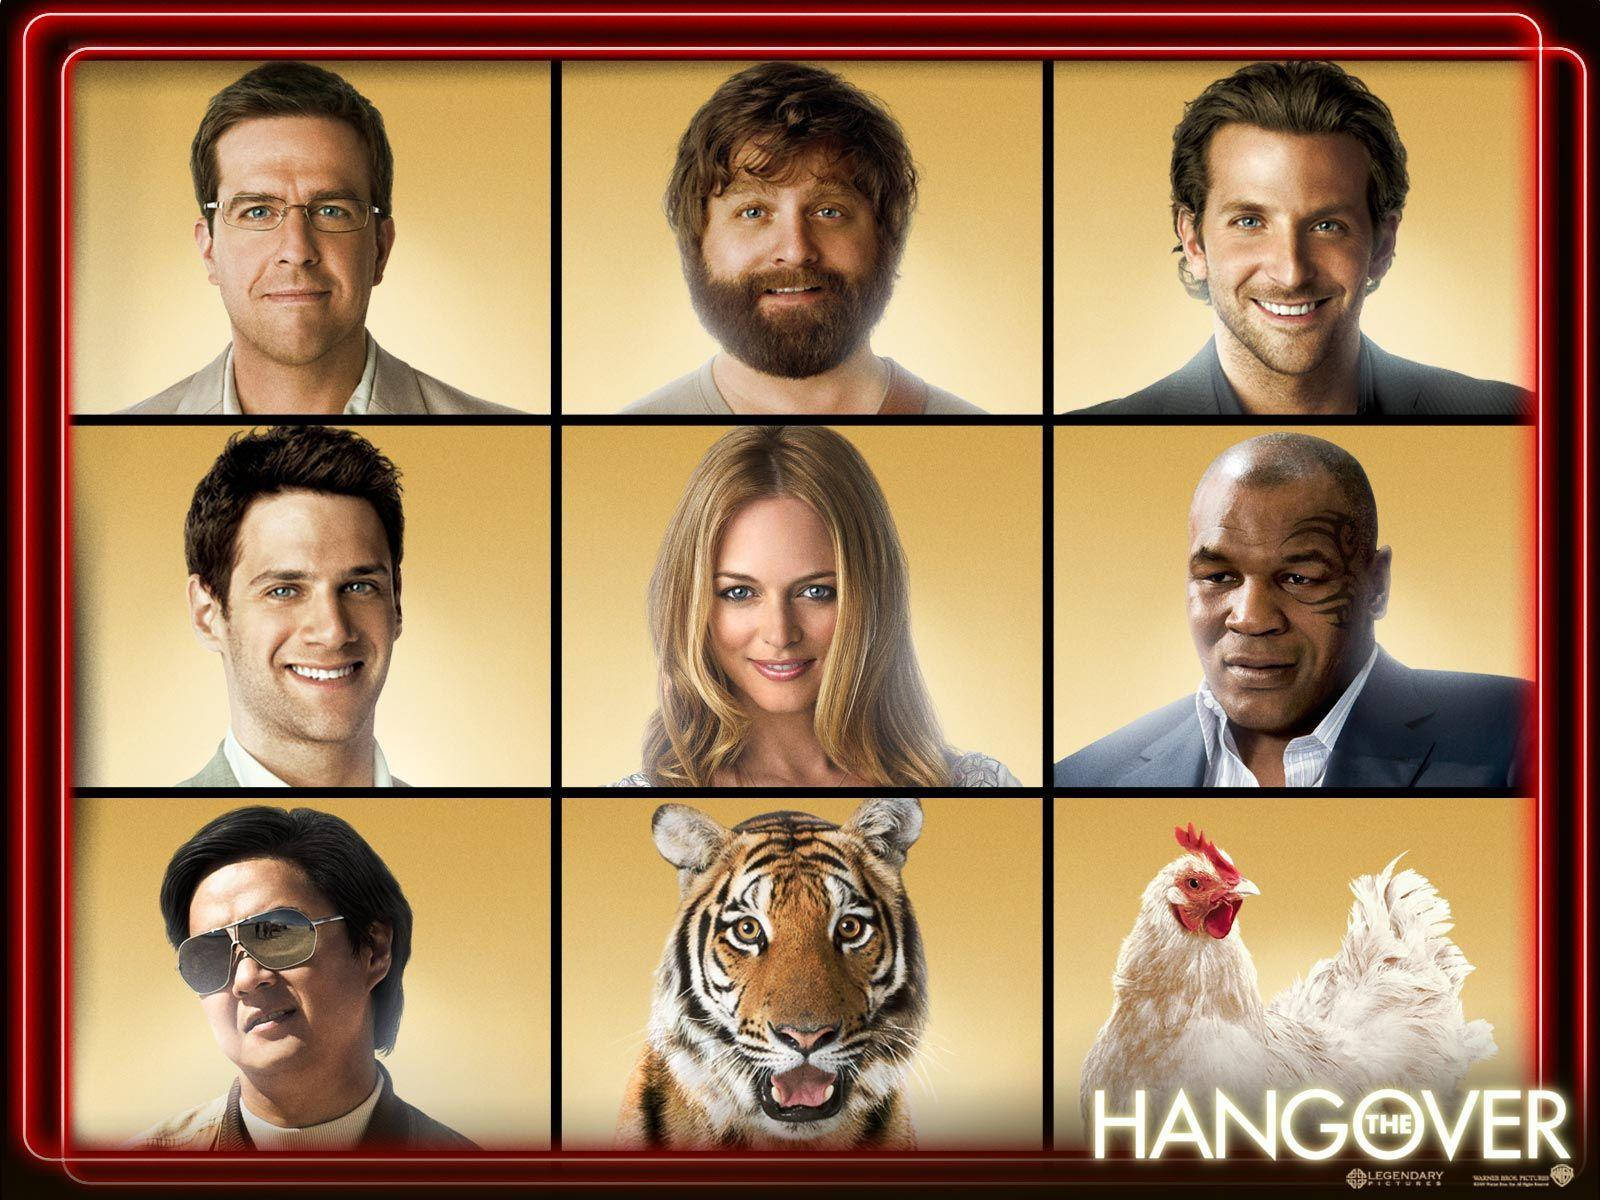 The Hangover American Comedy Movie Cast Poster Background